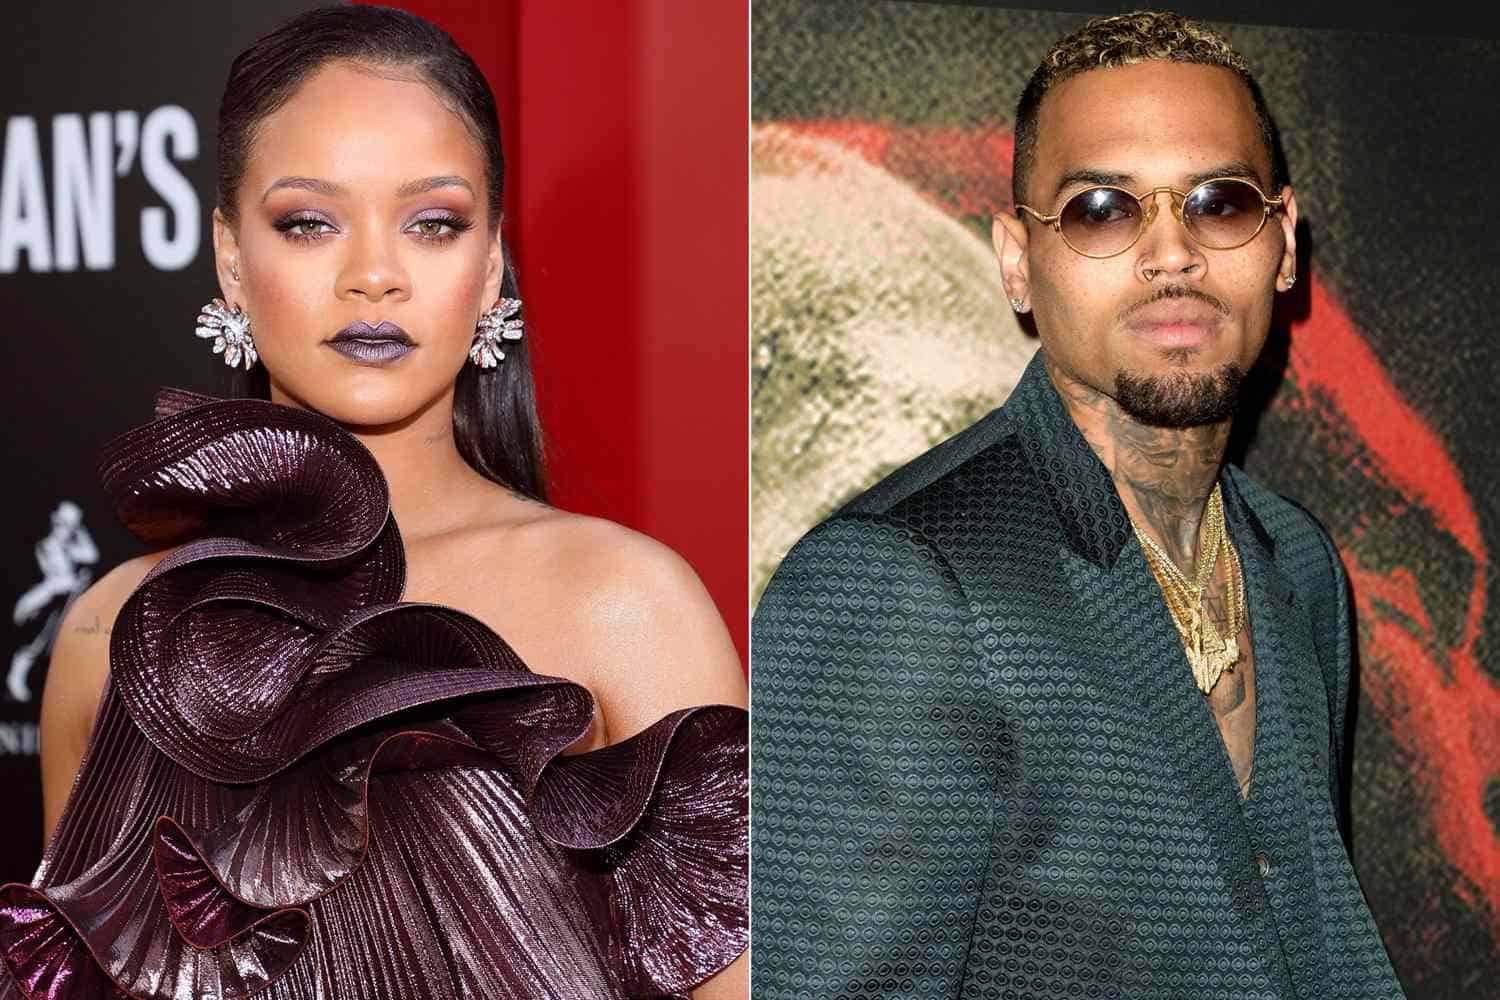 How Old Was Chris Brown When He Started Dating Rihanna